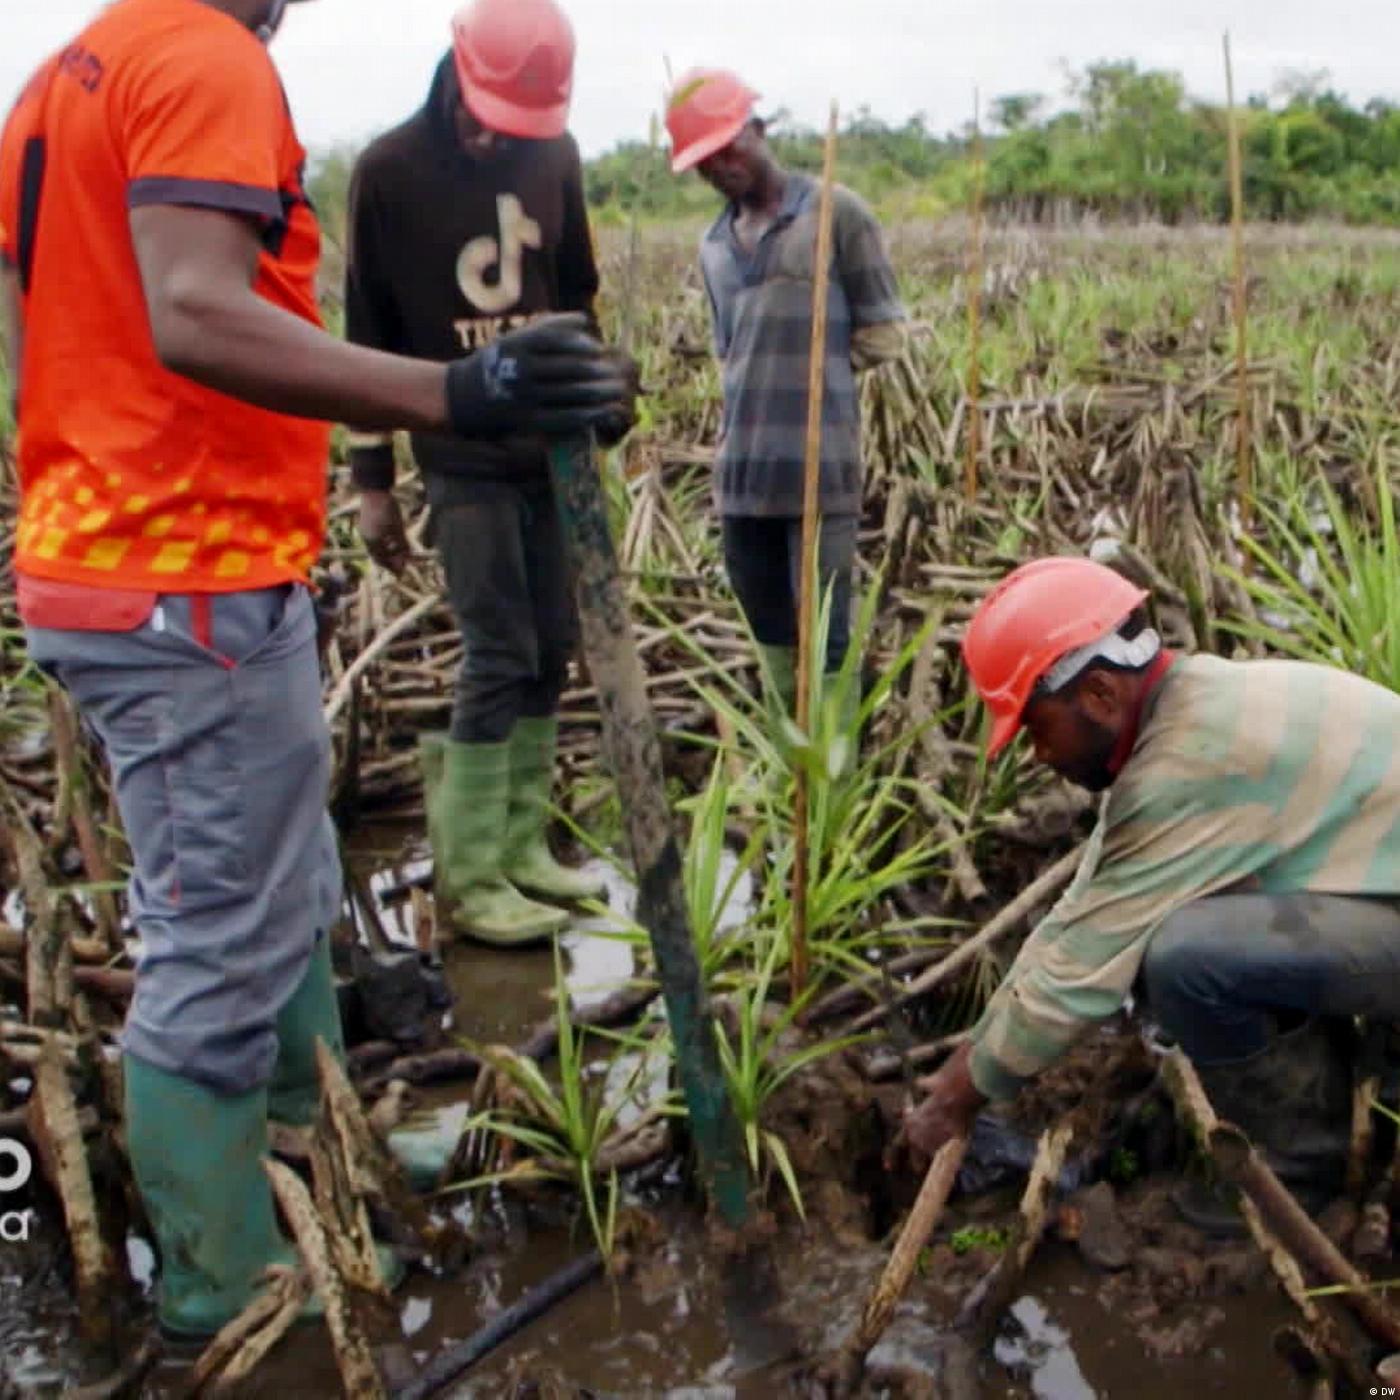 NGOs take on rising sea levels in Cameroon’s Douala